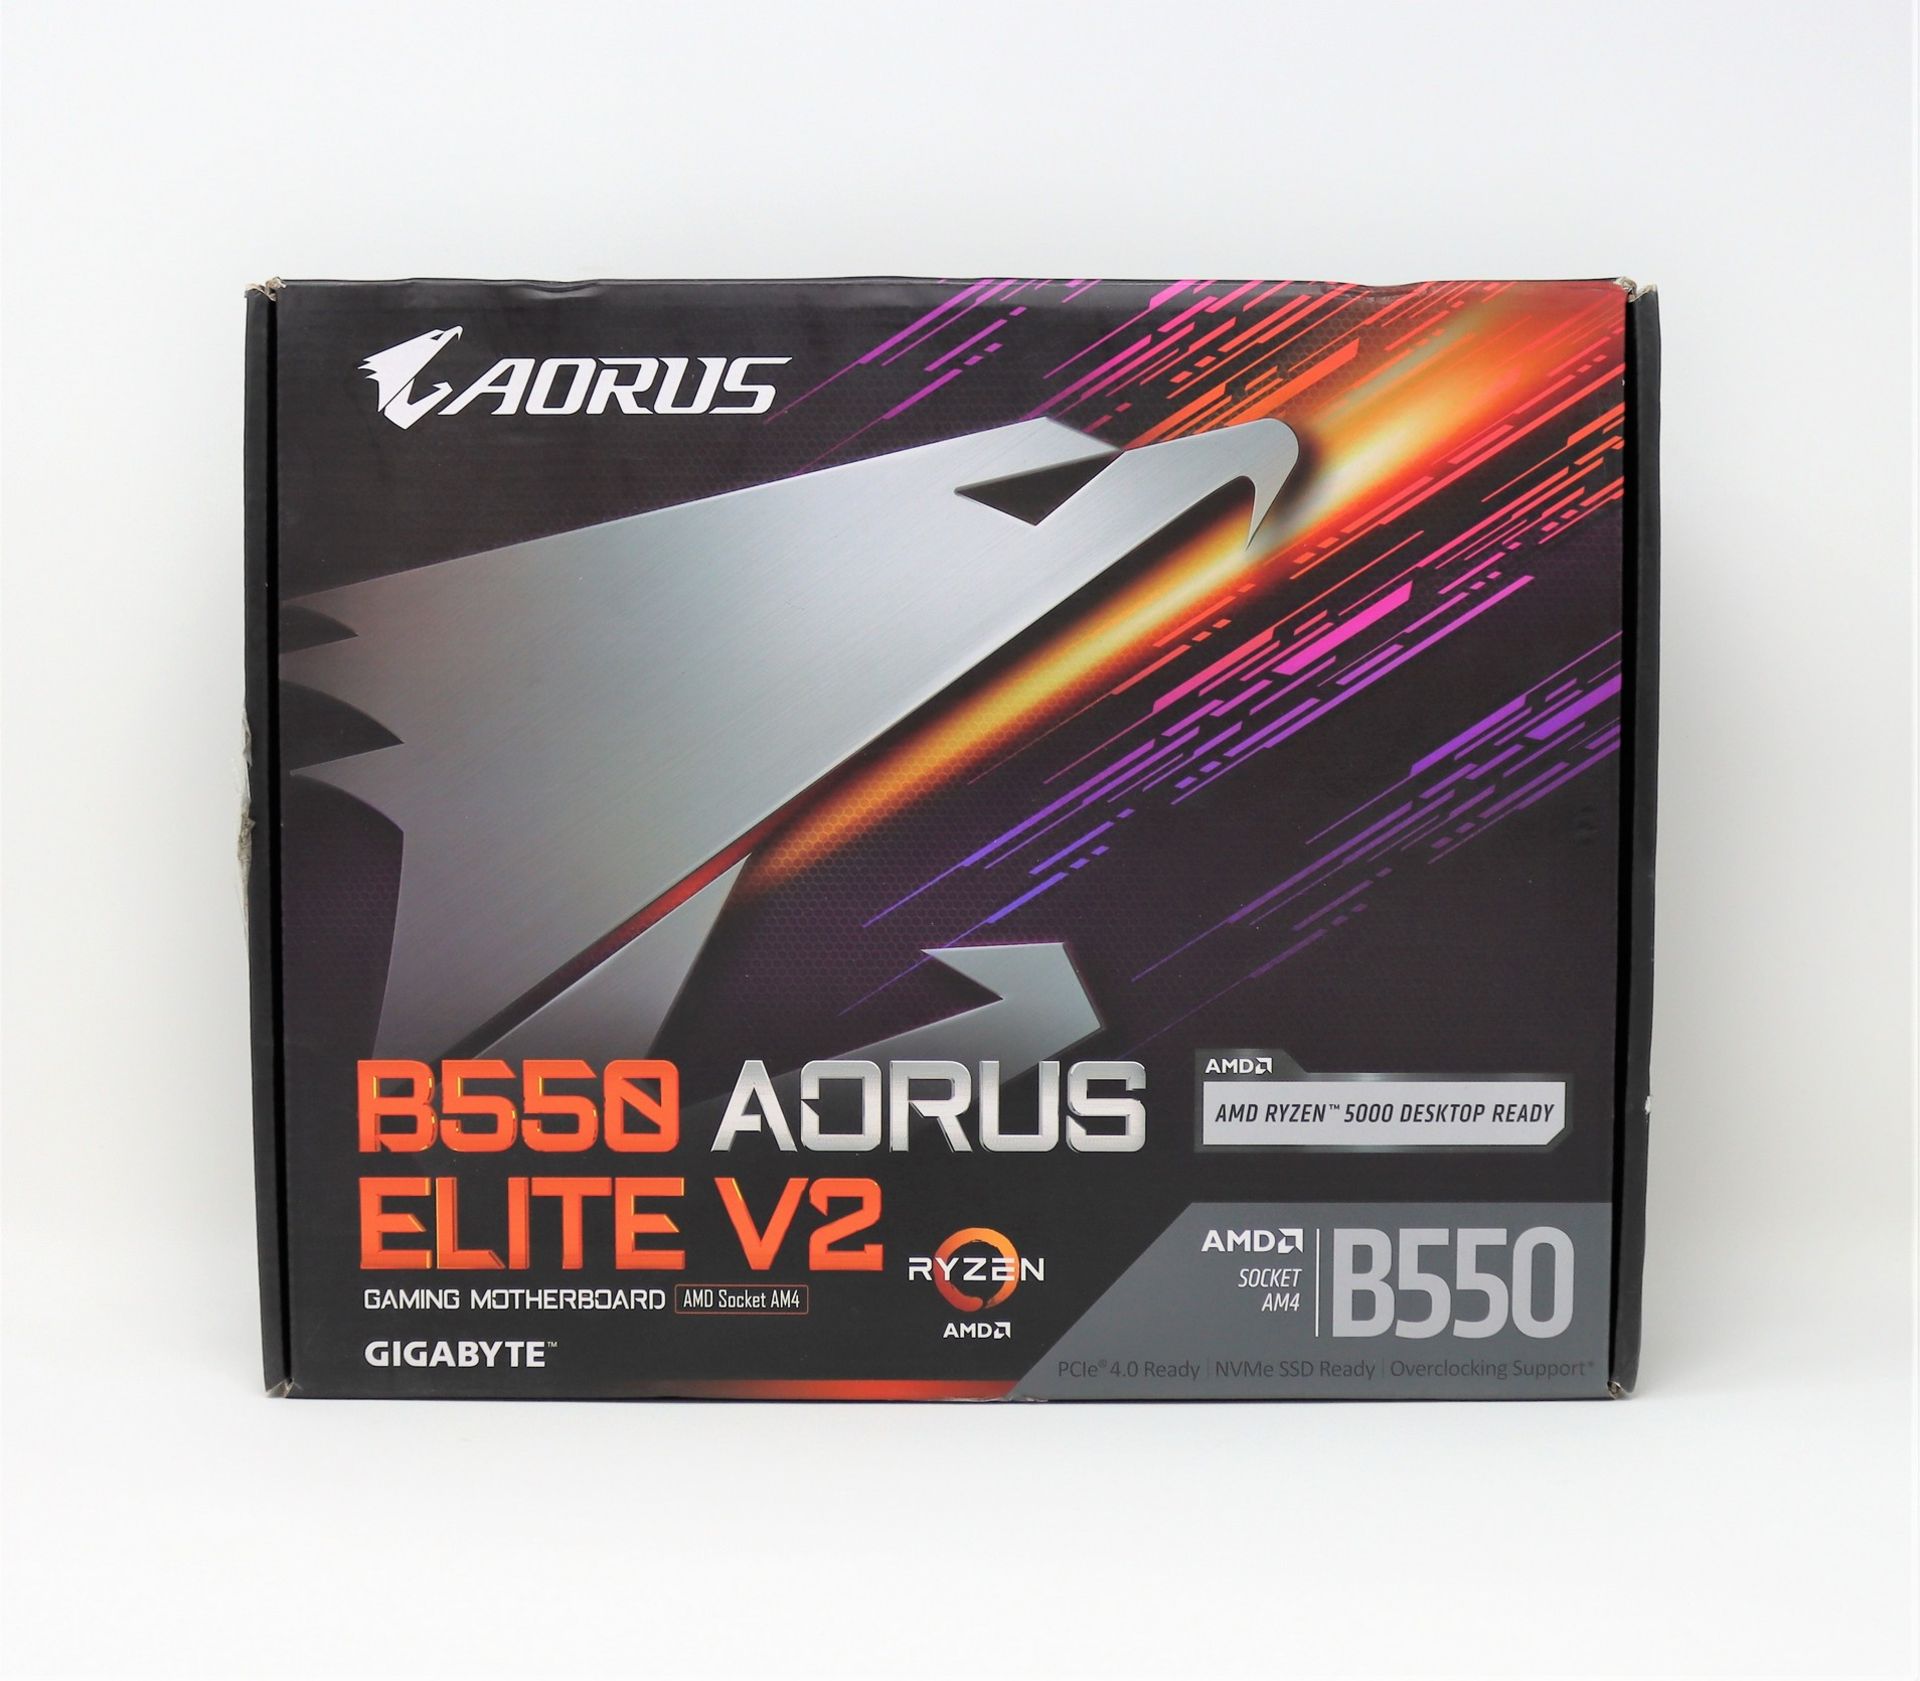 A boxed as new Gigabyte B550 Aorus Elite V2 gaming motherboard for AMD socket AM4 (ATX form